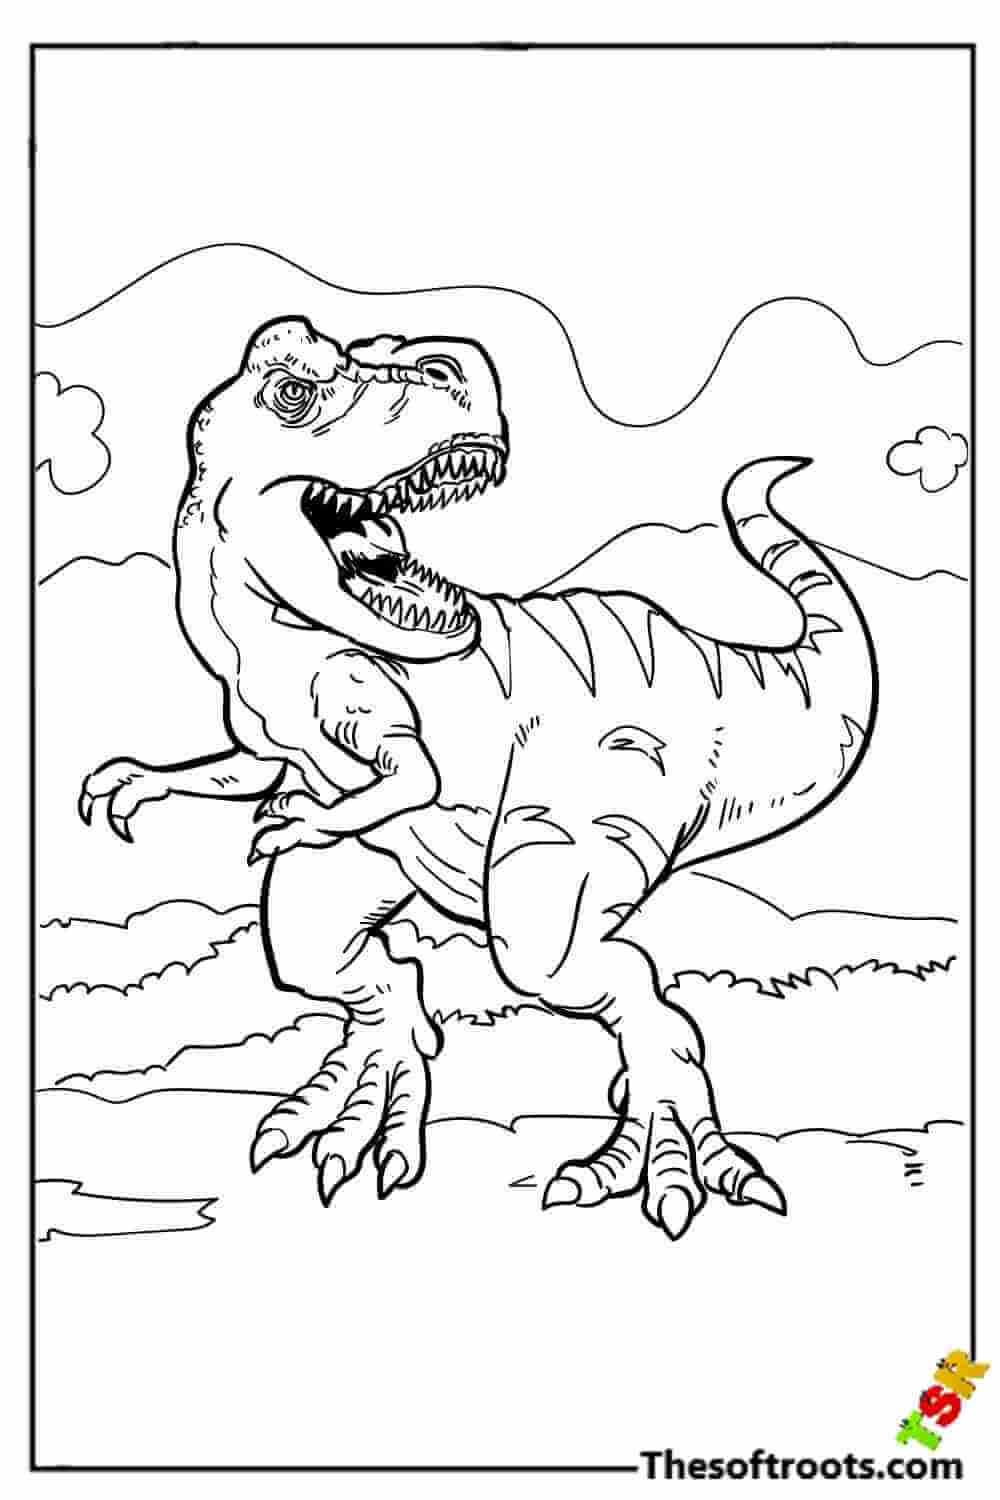 T-Rex Coloring Pages coloring pages